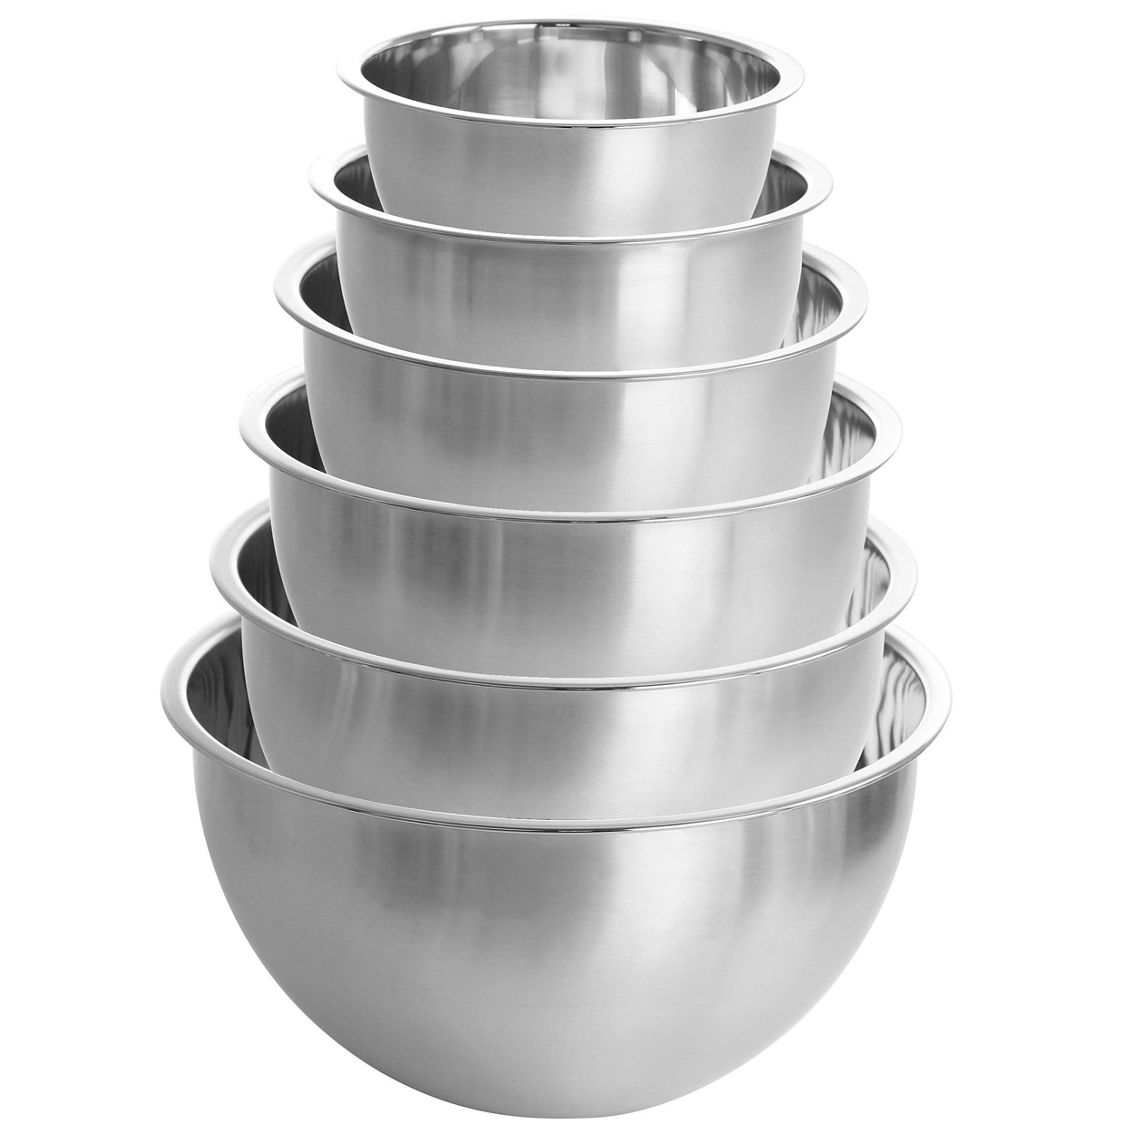 MegaChef 14 Piece Stainless Steel Measuring Cup and Spoon Set with Mixing Bowls - Image 3 of 5